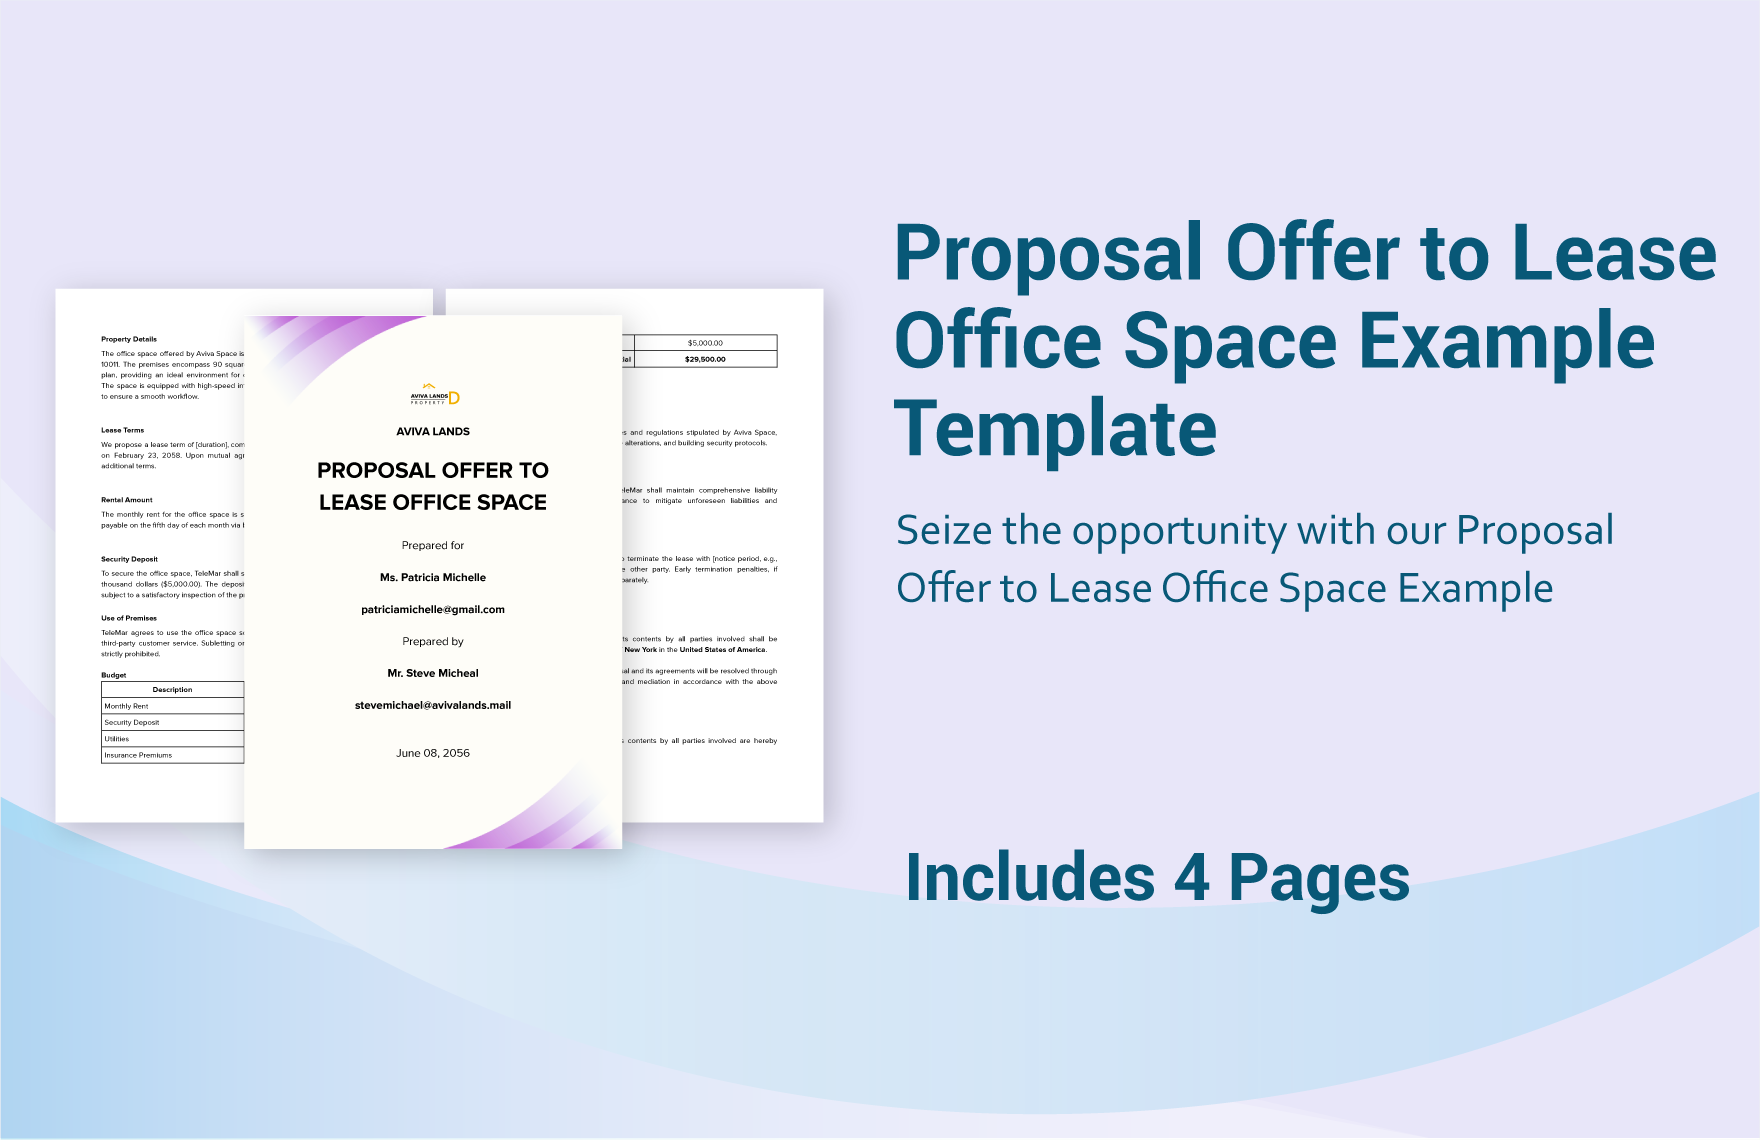 proposal-offer-to-lease-office-space-example